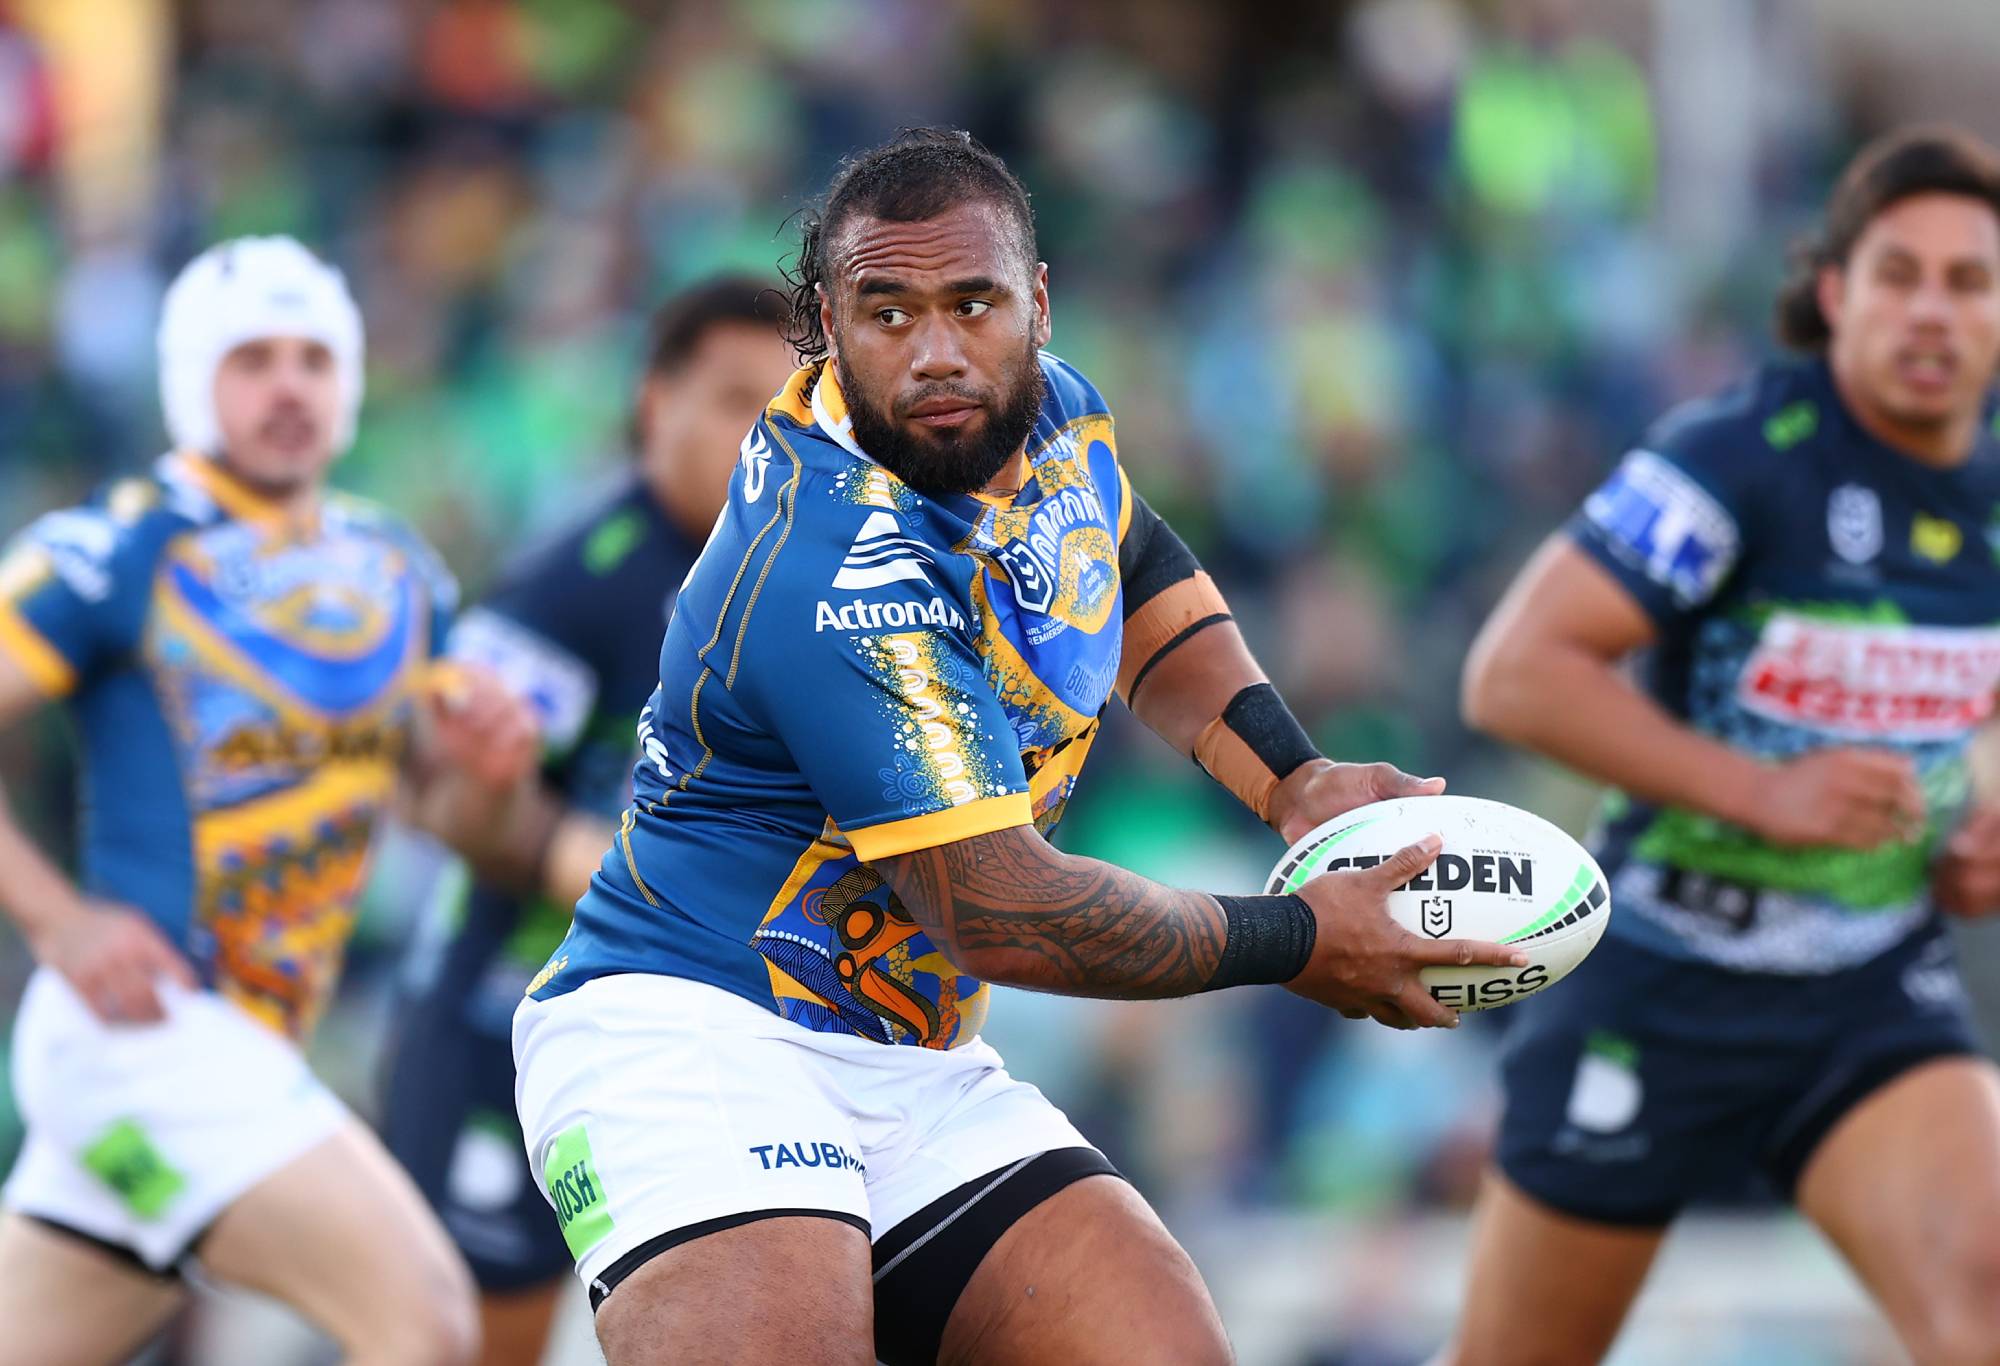 CANBERRA, AUSTRALIA - MAY 29: Junior Paulo eels in a bout during round 12 of an NRL match between the Canberra Raiders and Parramatta Eels at GIO Stadium, on May 29, 2022, in Canberra, Australia.  (Photo by Mark Nolan/Getty Images)